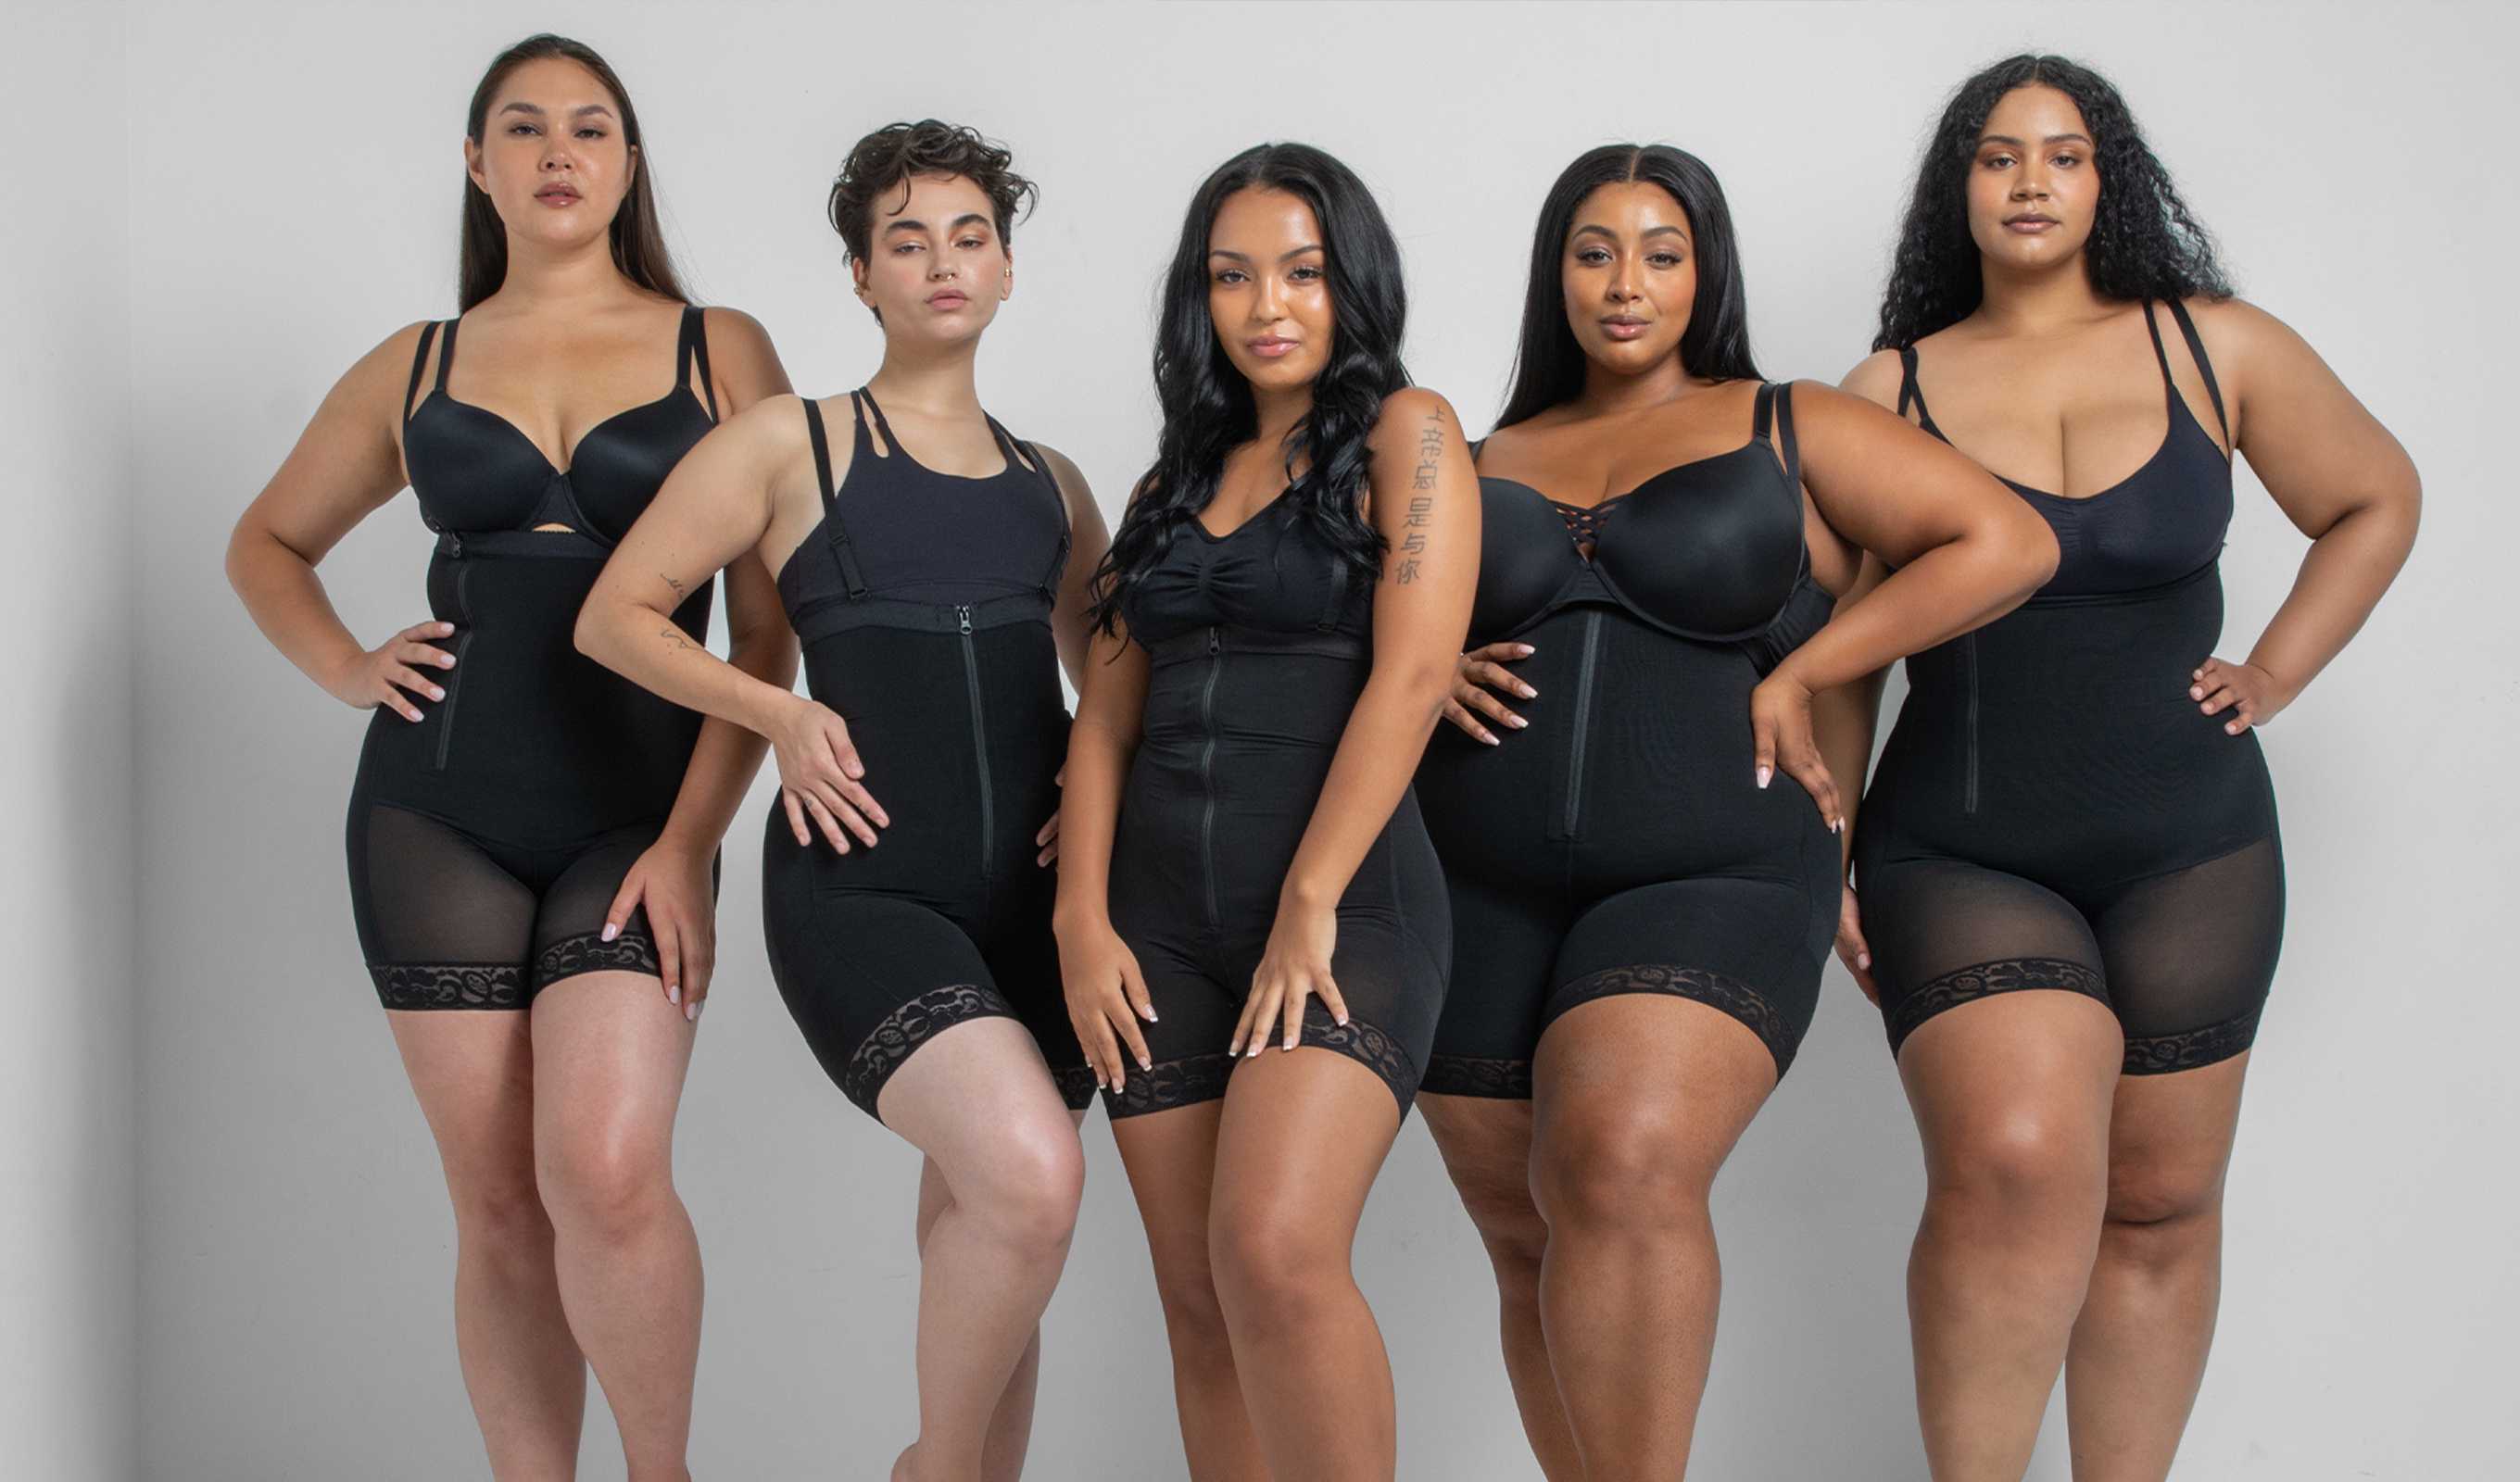 The Science Behind Shapewear: Which One Will Work the Best for You